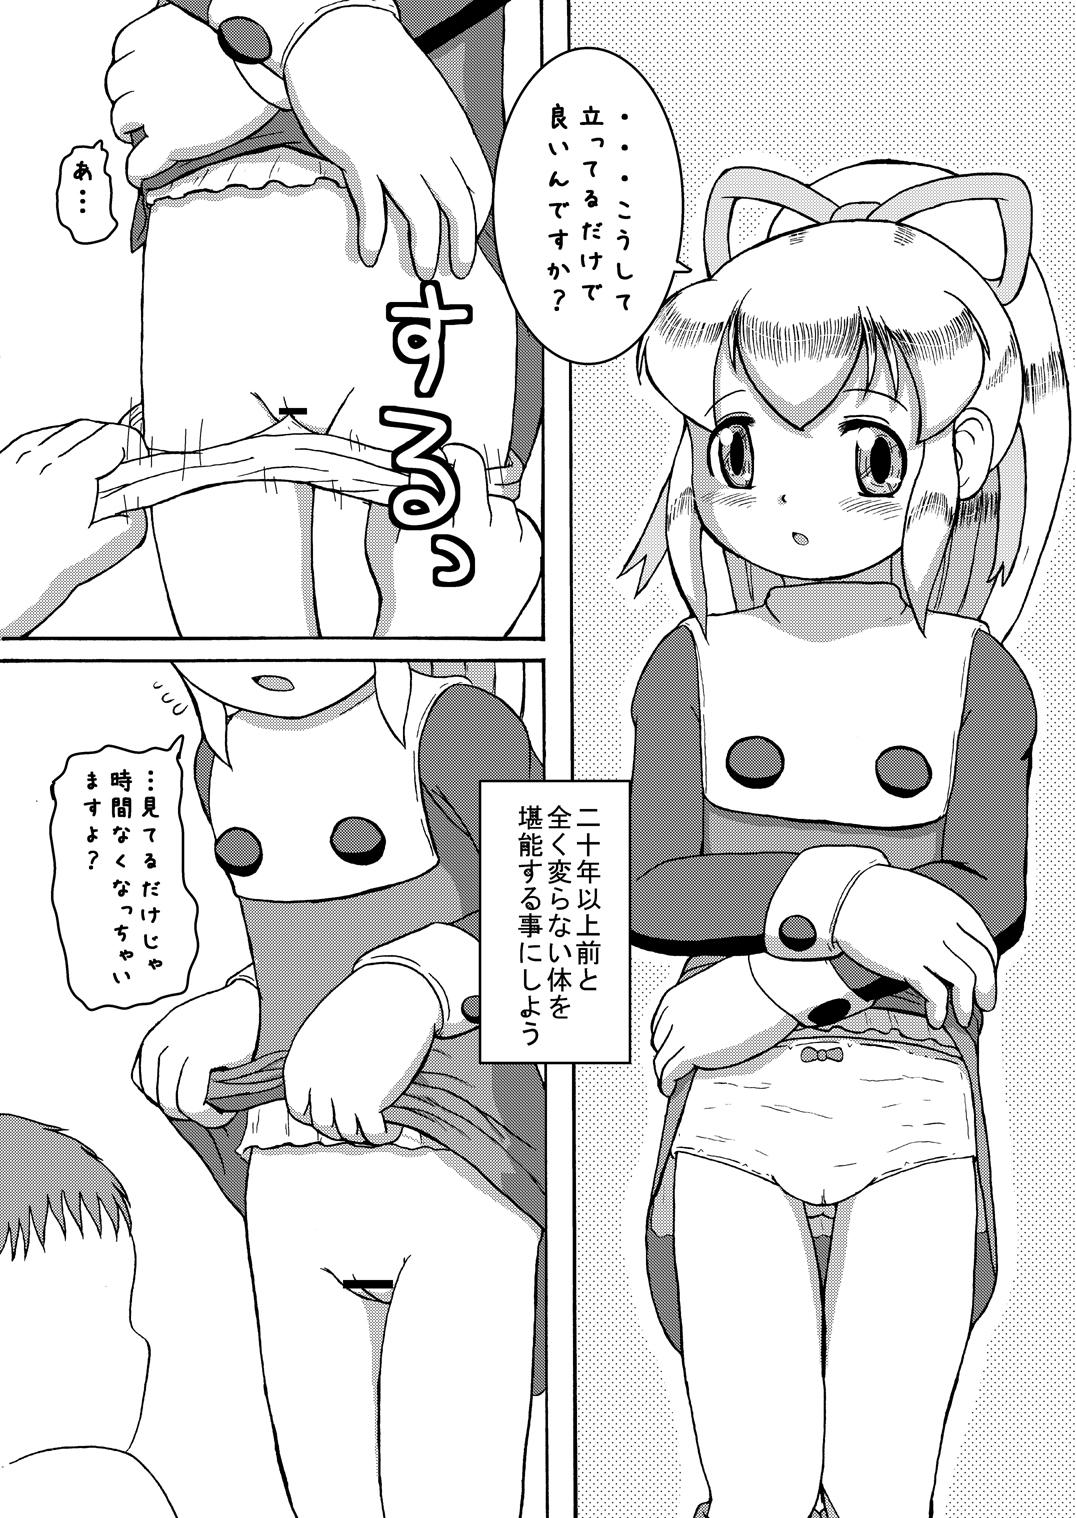 Wife LoveRoLL+DDD - Megaman Cyberbots Climax - Page 3